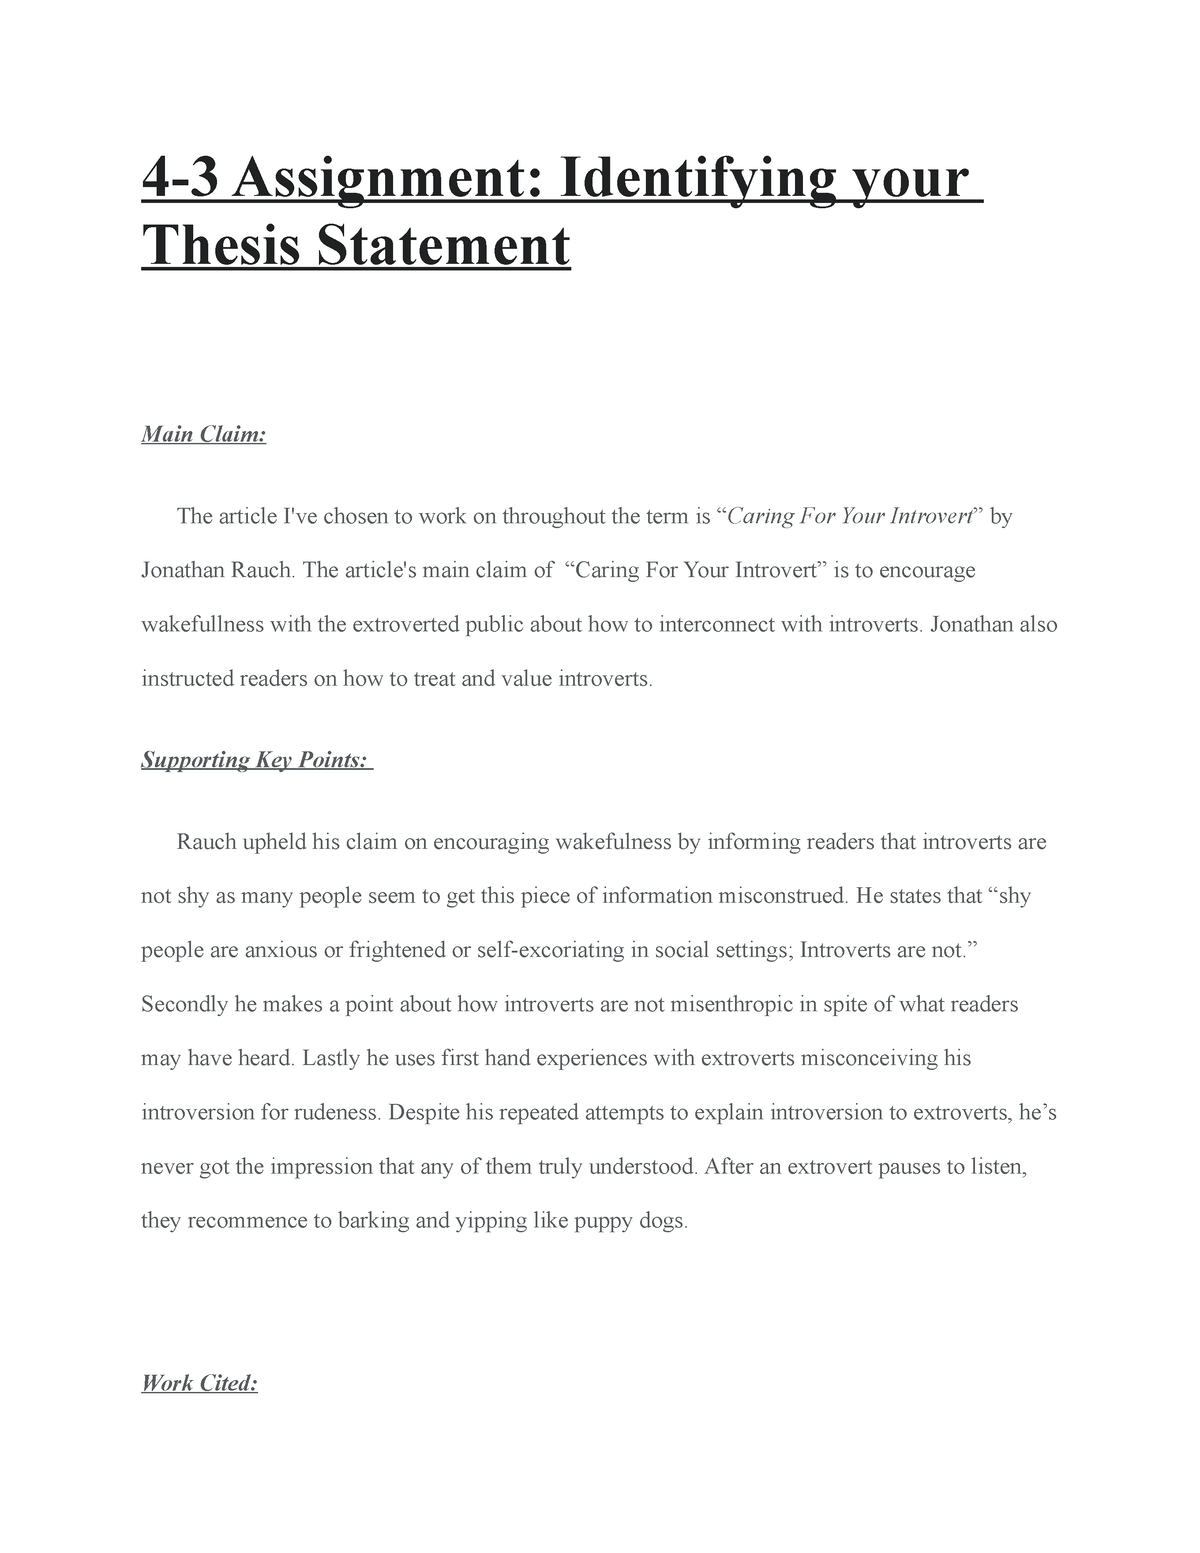 do you indent your thesis statement